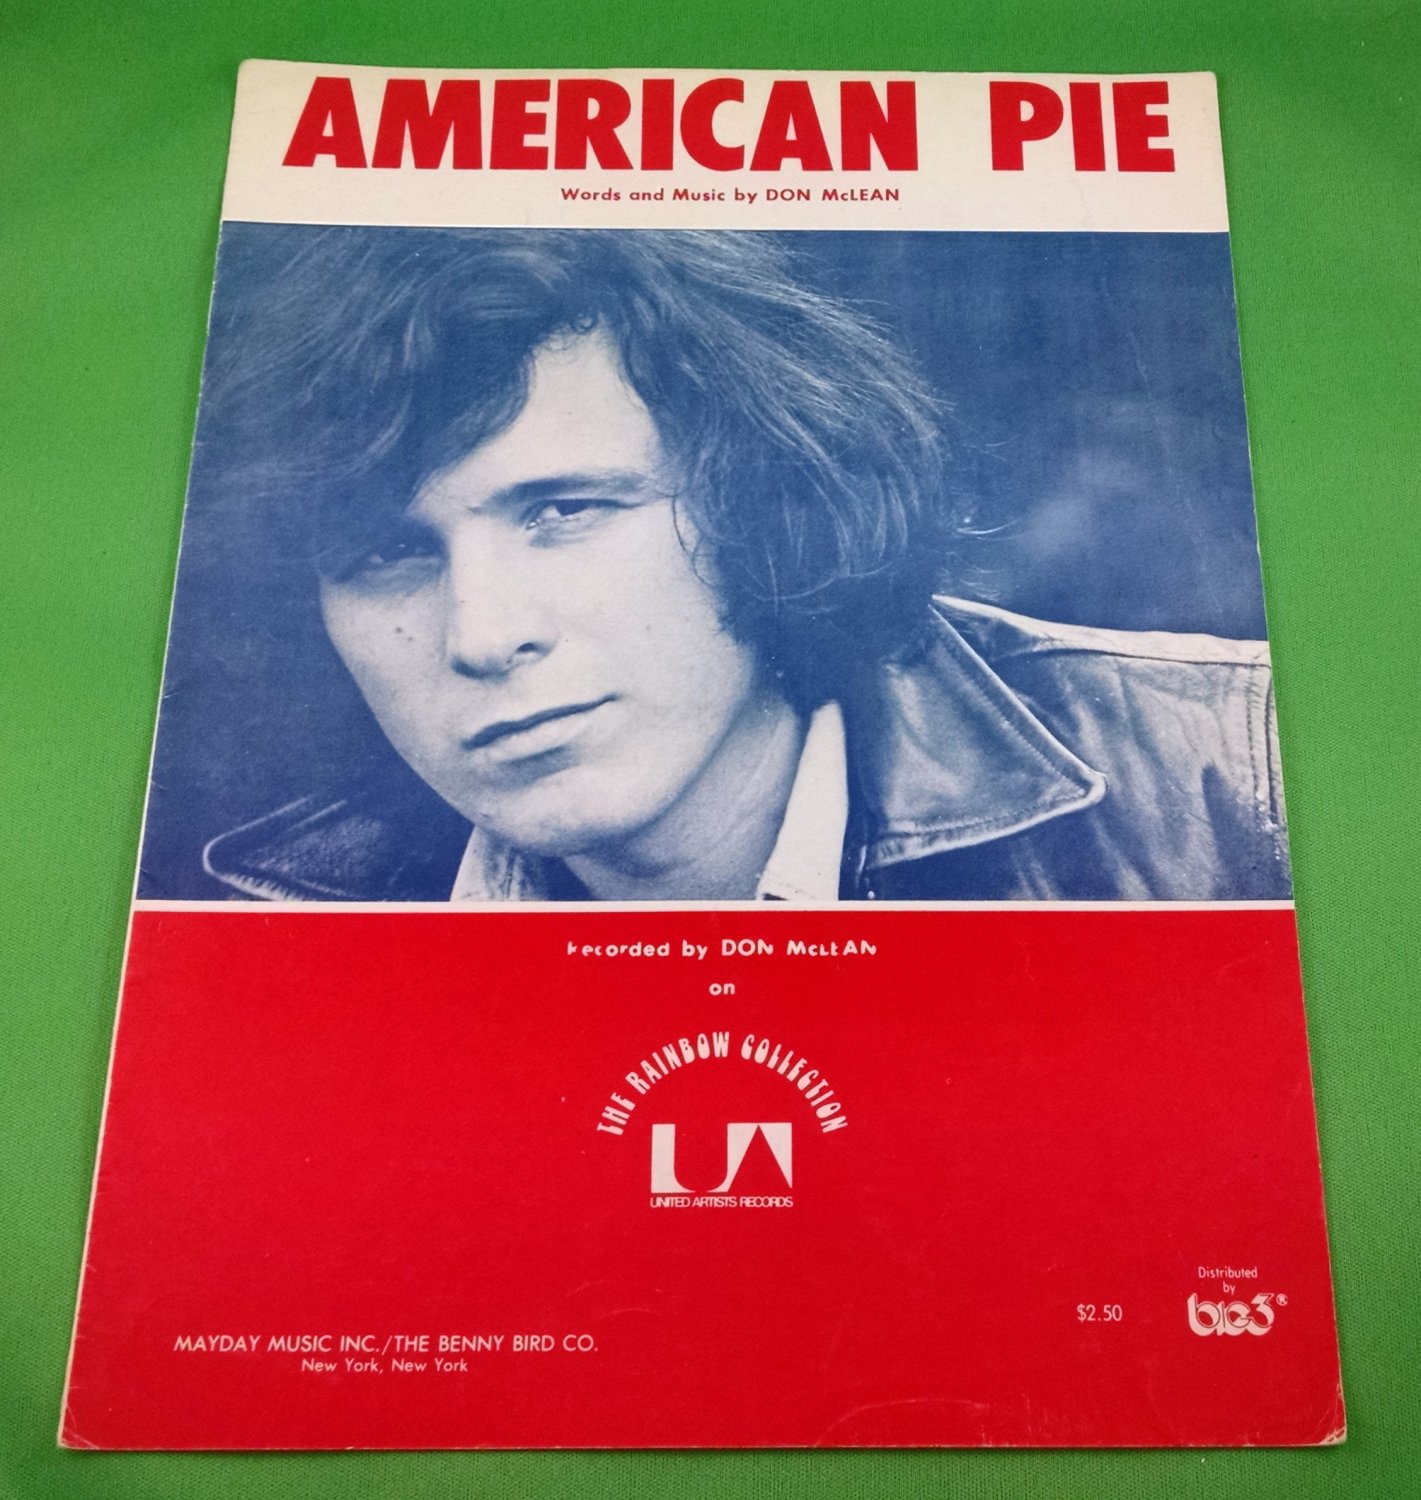 history of american pie song